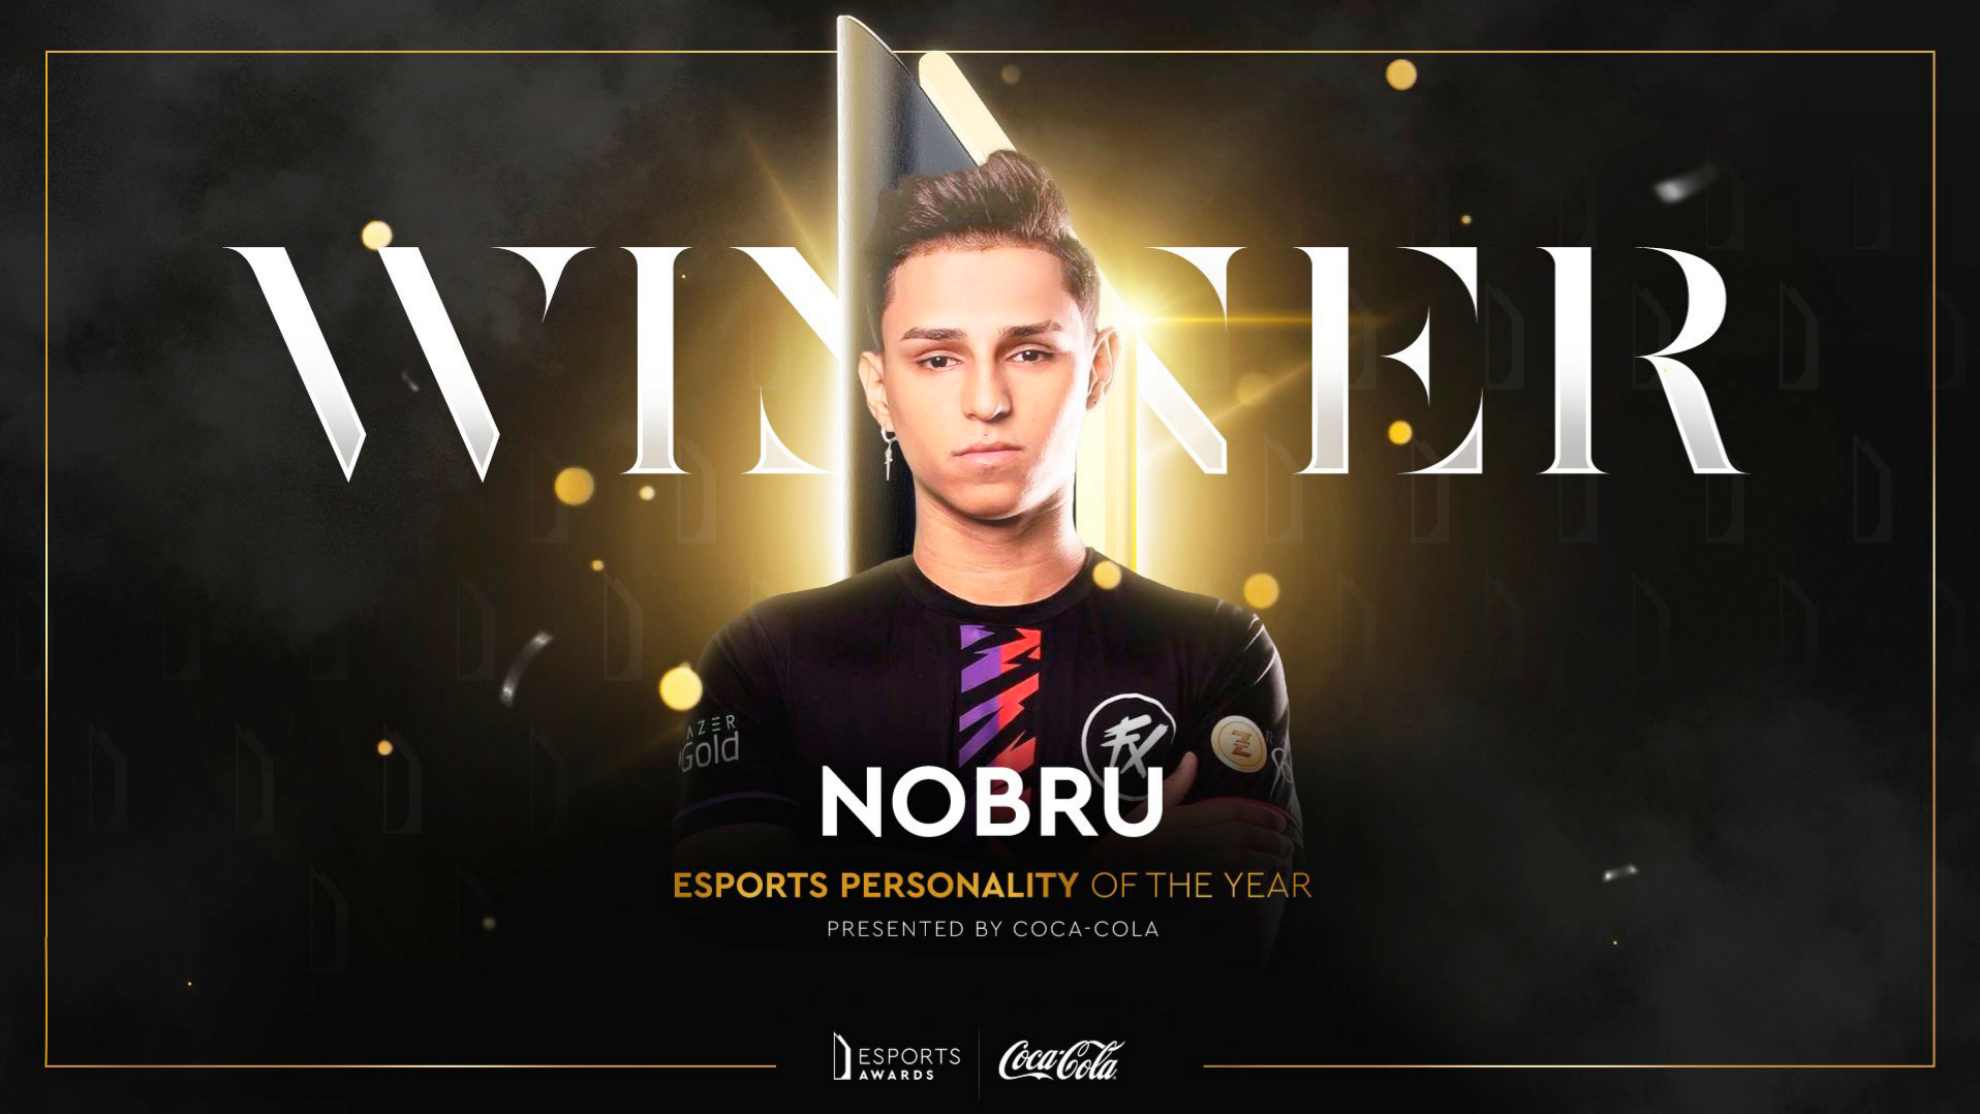 Esports Personality of the Year